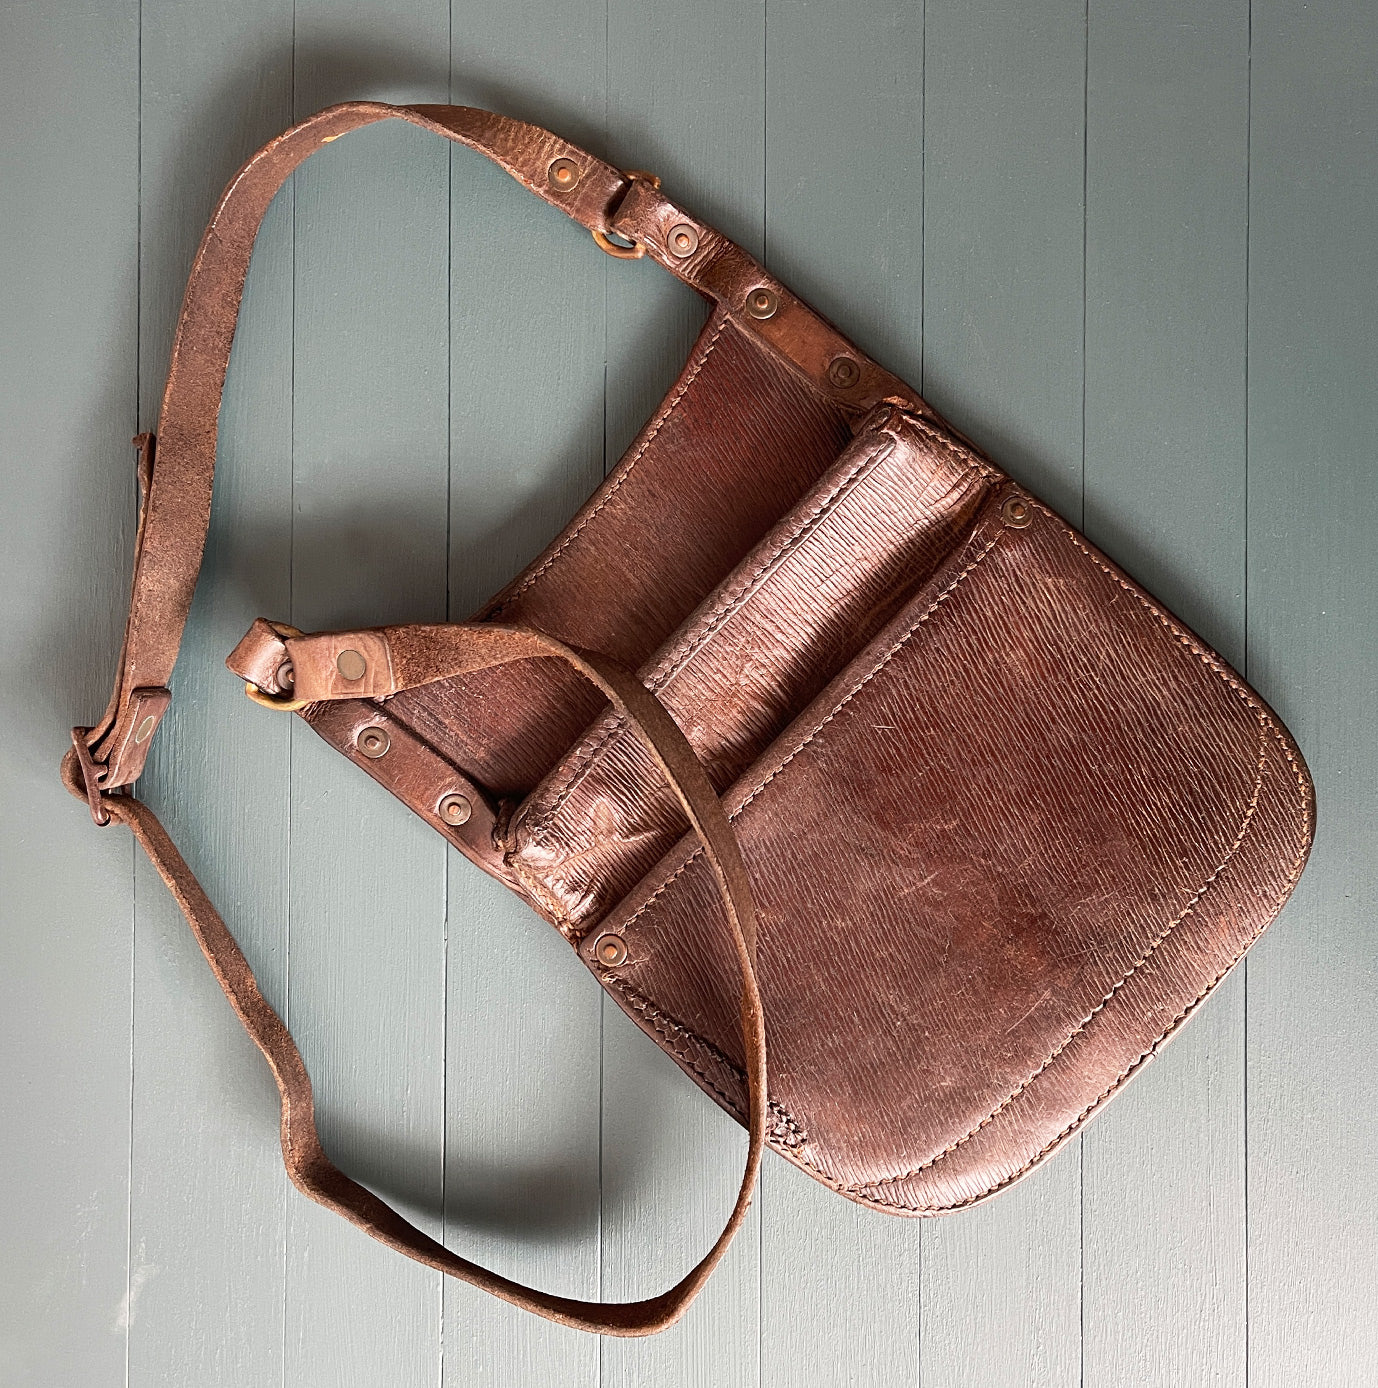 Vintage Bus Conductors Leather Money Bag made from quality thick leather with studded copper rivets and brass buckles. Stamped 'A3969' on the reverse. It has two good sized pockets perfect for your cash and loose change - SHOP NOW - www.intovintage.co.uk